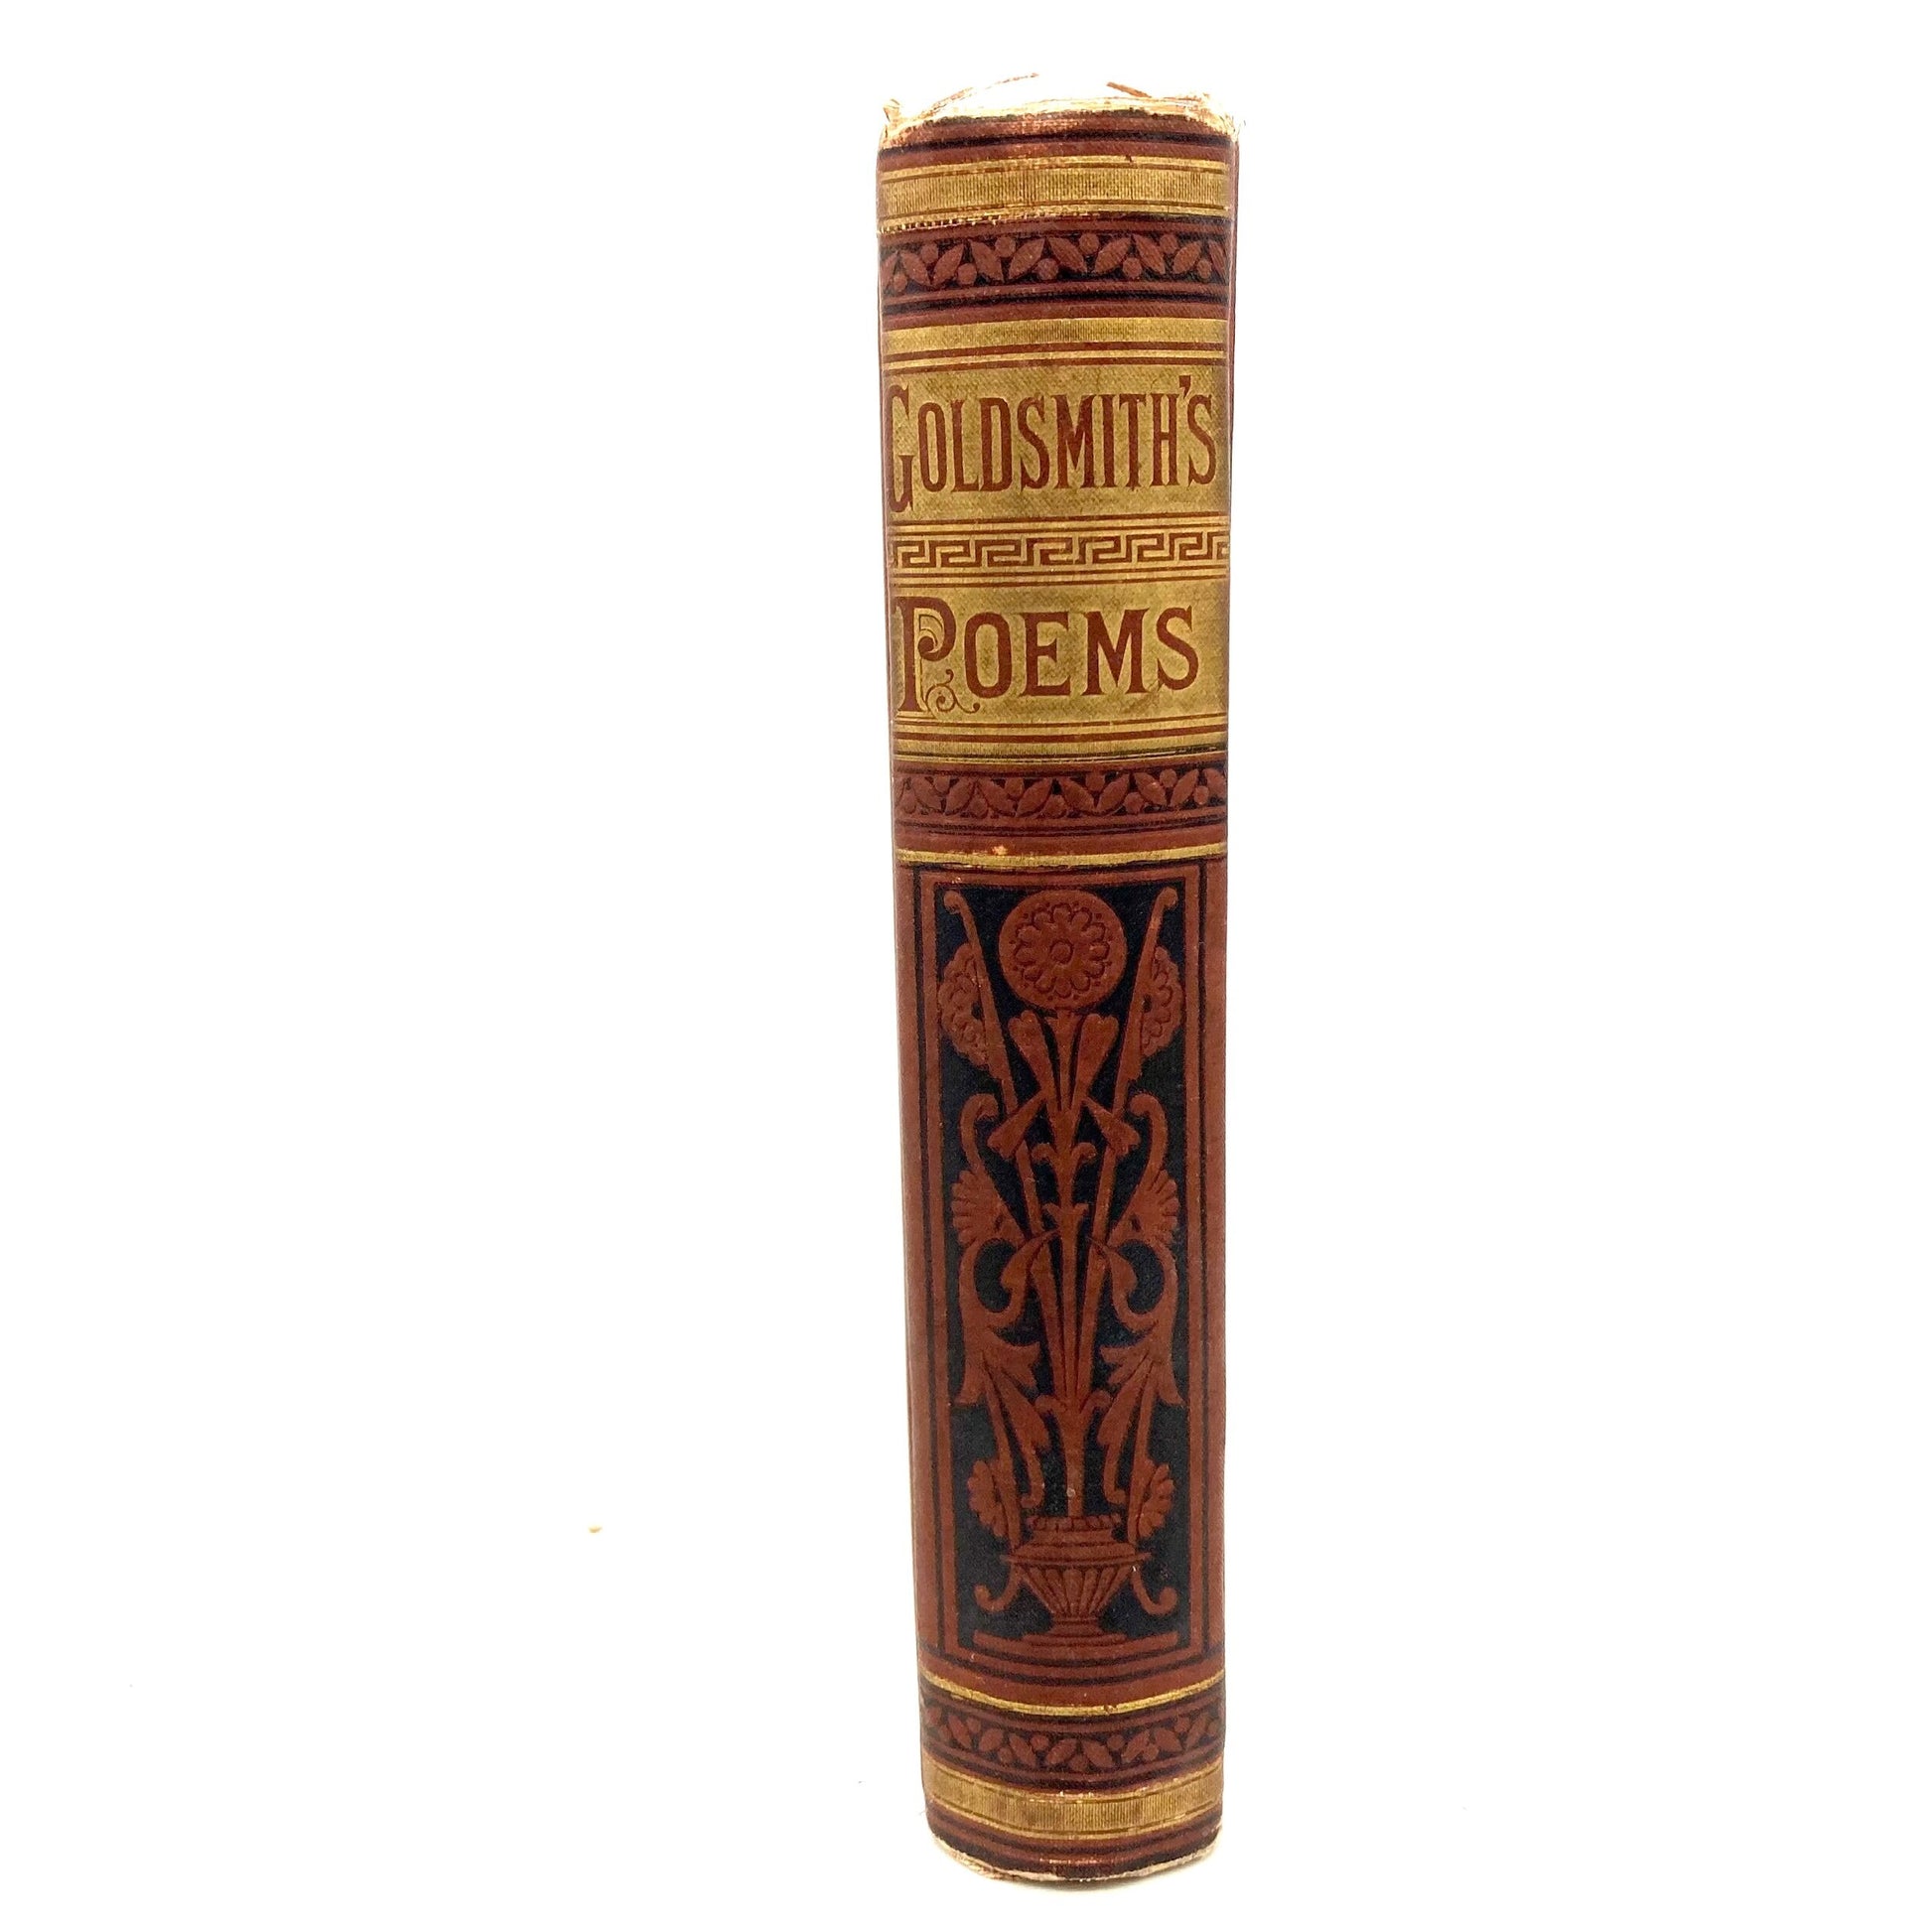 GOLDSMITH, Oliver "Poems, Plays, and Essays" [T.Y. Crowell, c1880s] - Buzz Bookstore